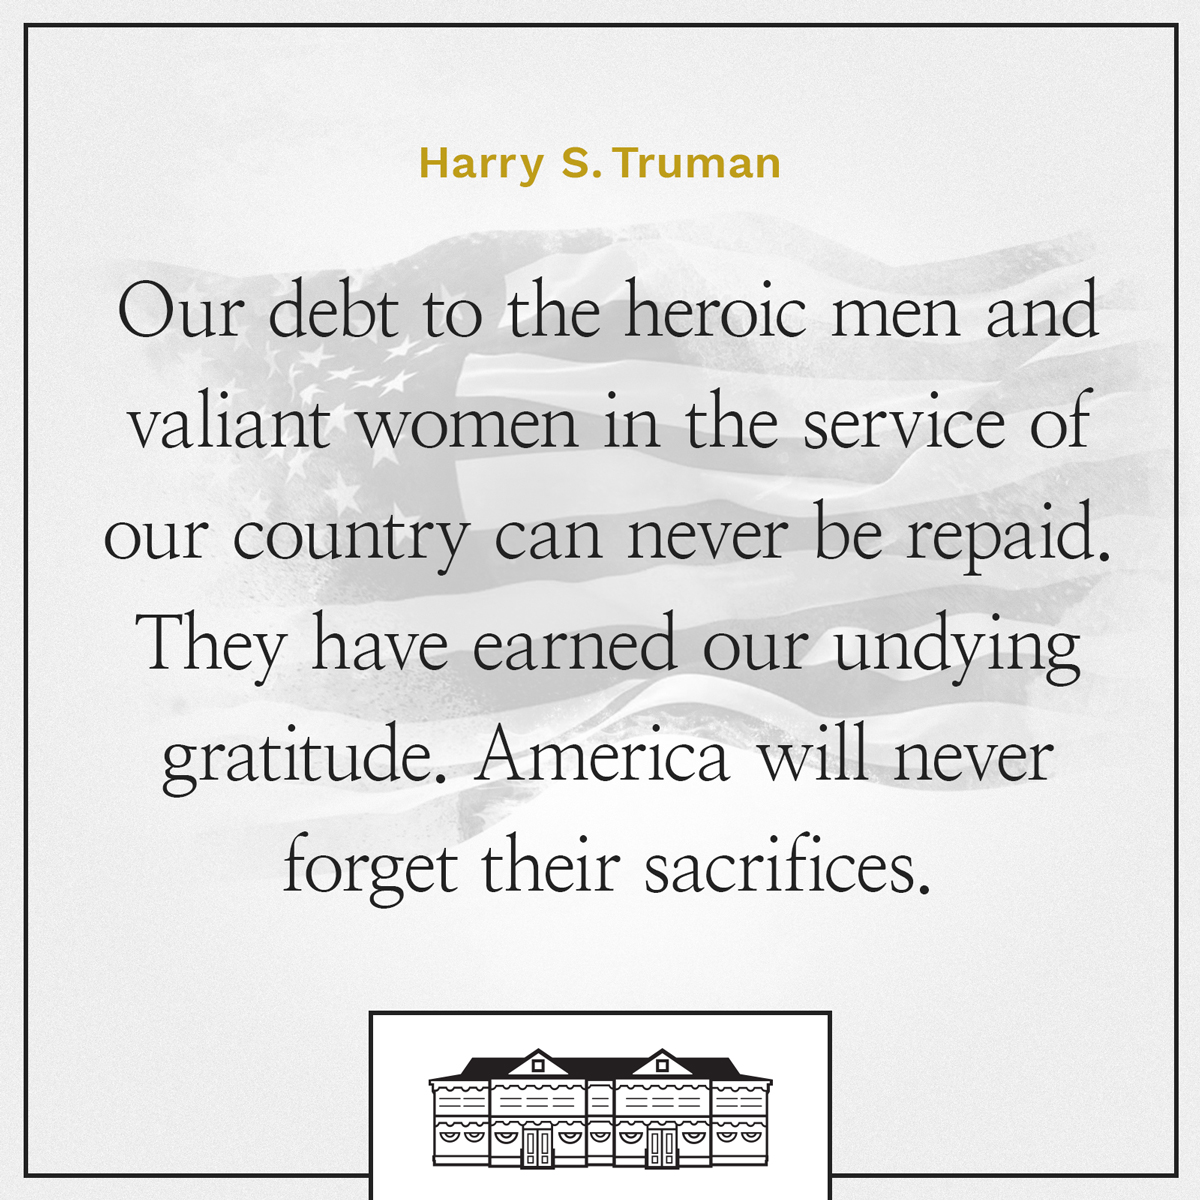 The Truman Little White House would like to express our deepest gratitude to the men and women who have served our country. 🇺🇸